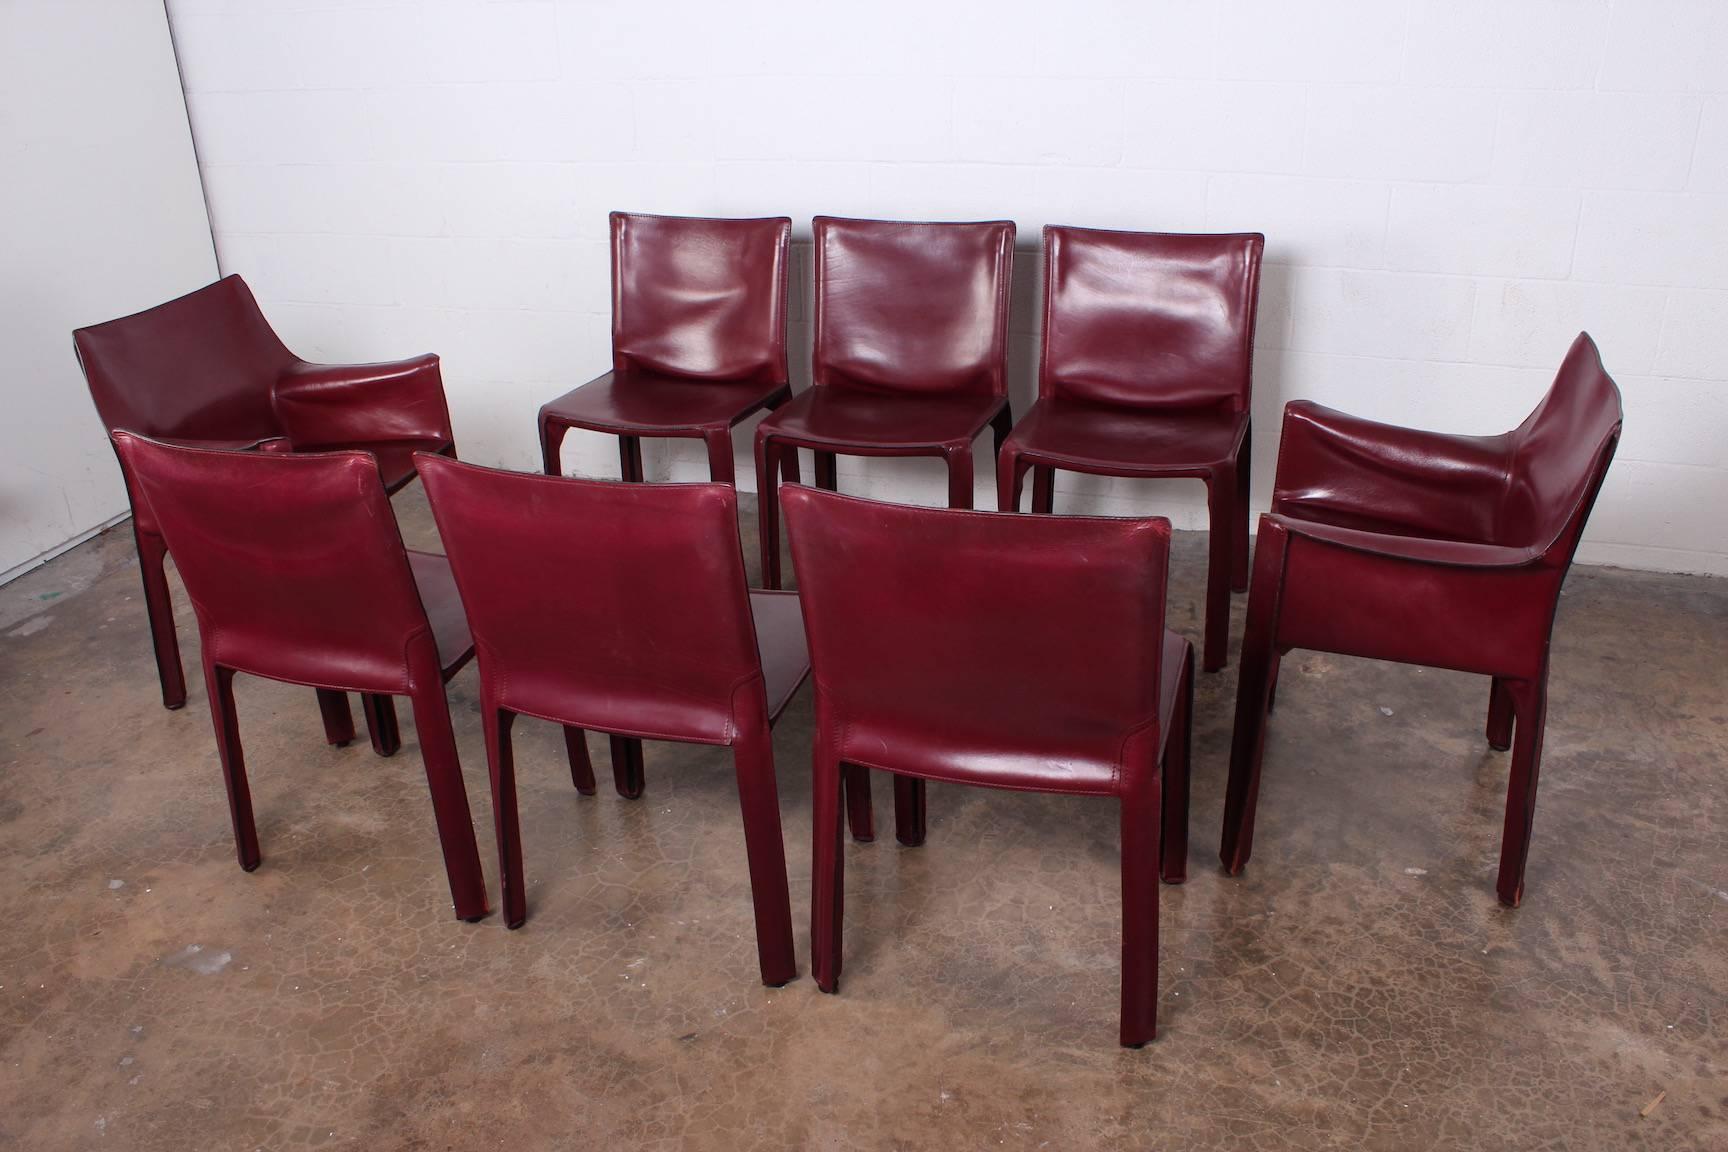 A vintage set of eight Oxblood leather Cab armchairs designed by Mario Bellini for Cassina.
 